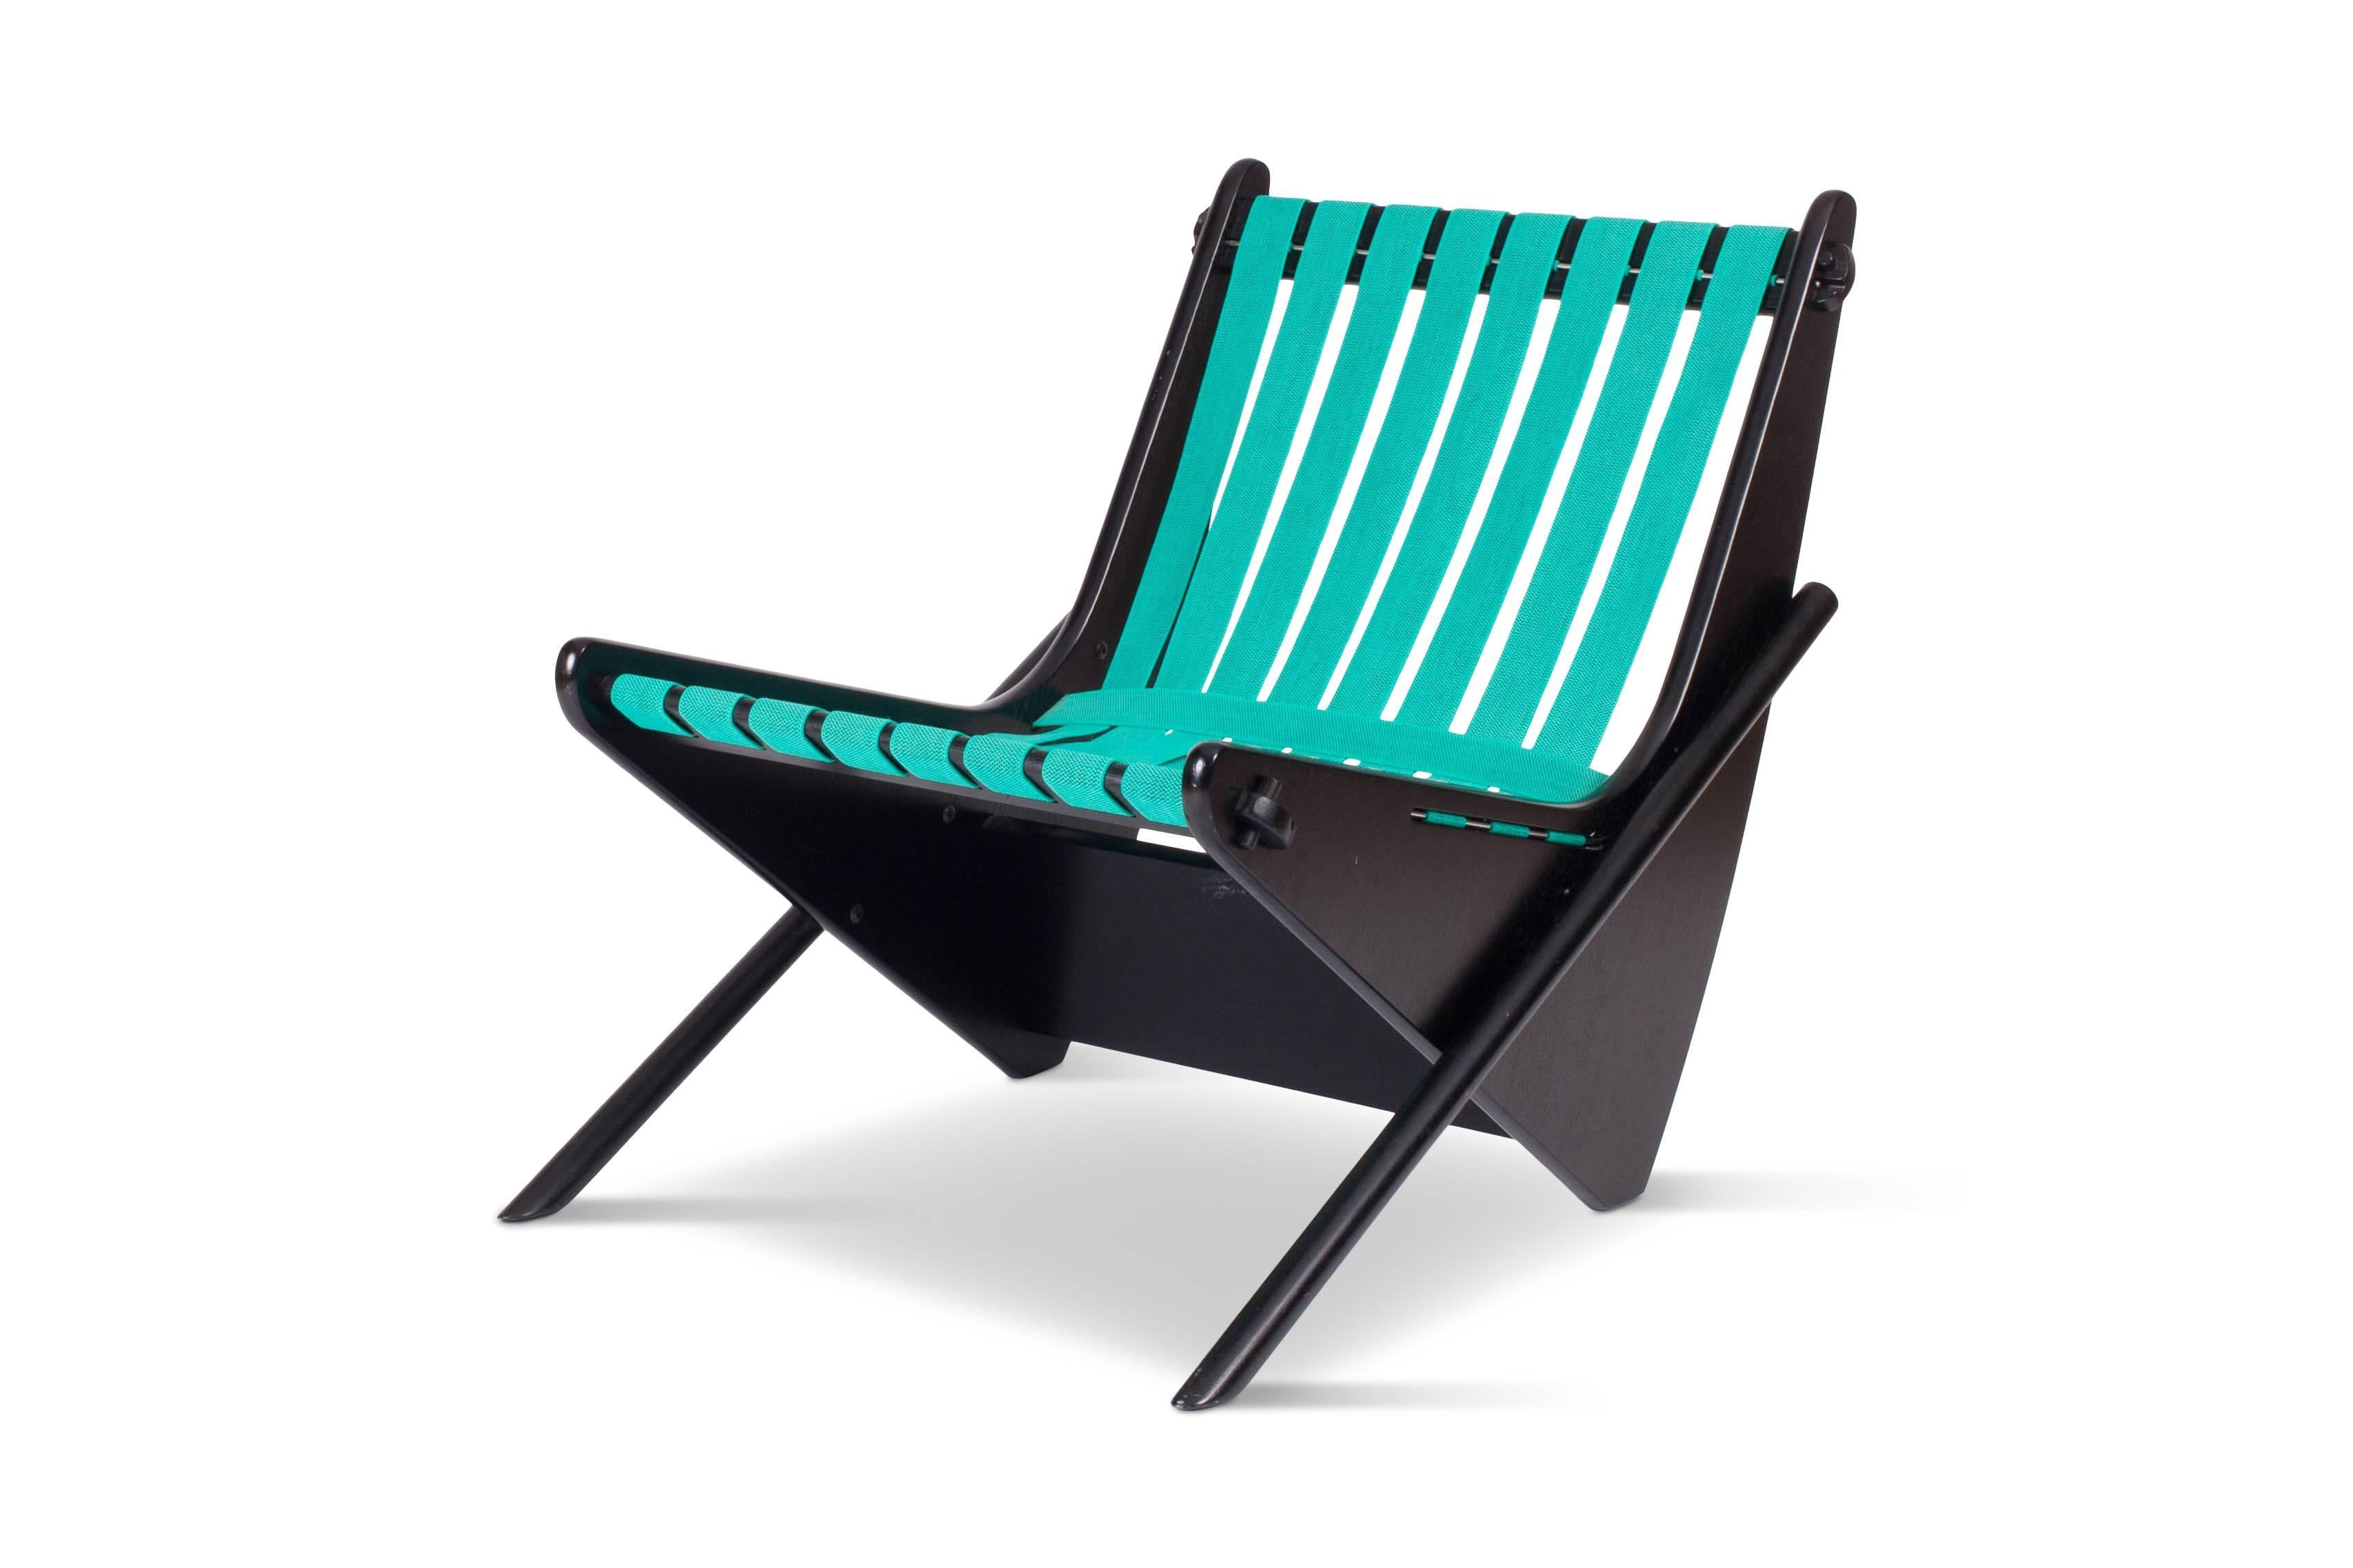 Richard Neutra, 'Boomerang' lounge chair, Brazil
This limited edition chair was manufactured by Bona SRL Italy in the 1980s.
The black lacquered wooden frame holds a bright green webbing that
creates a comfortable seat. The wooden elements of the